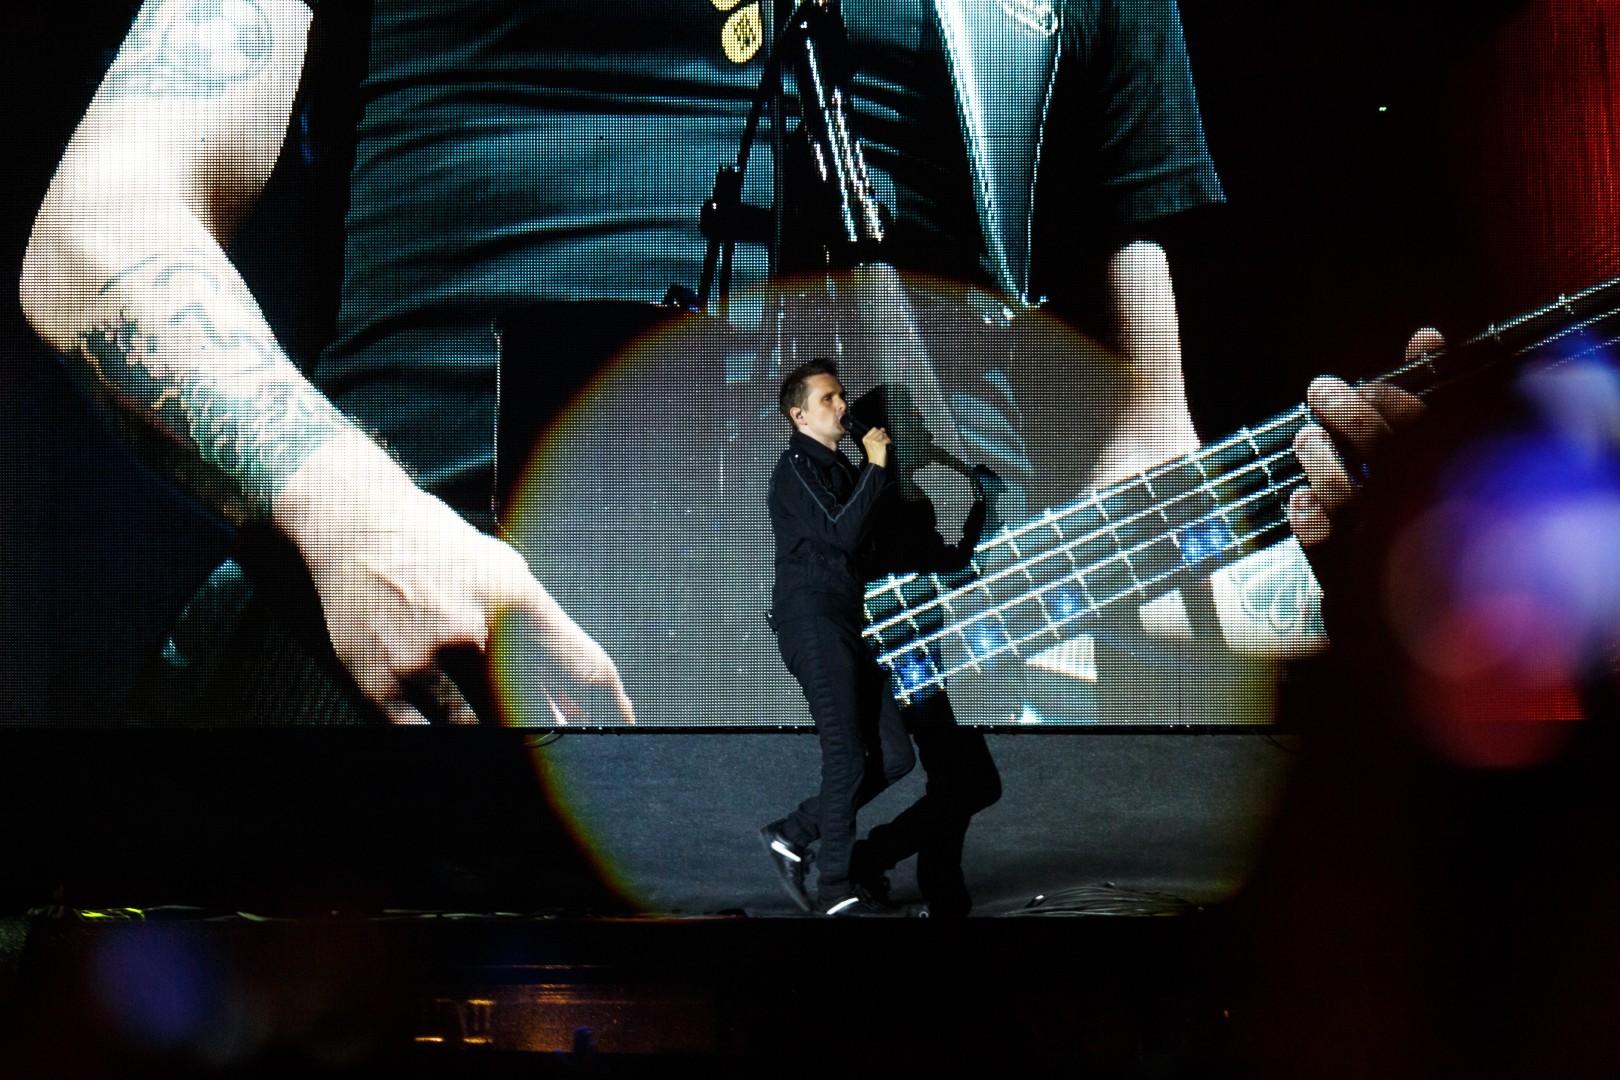 Muse at Piața Constituției in Bucharest on July 29, 2016 (6deaed2772)